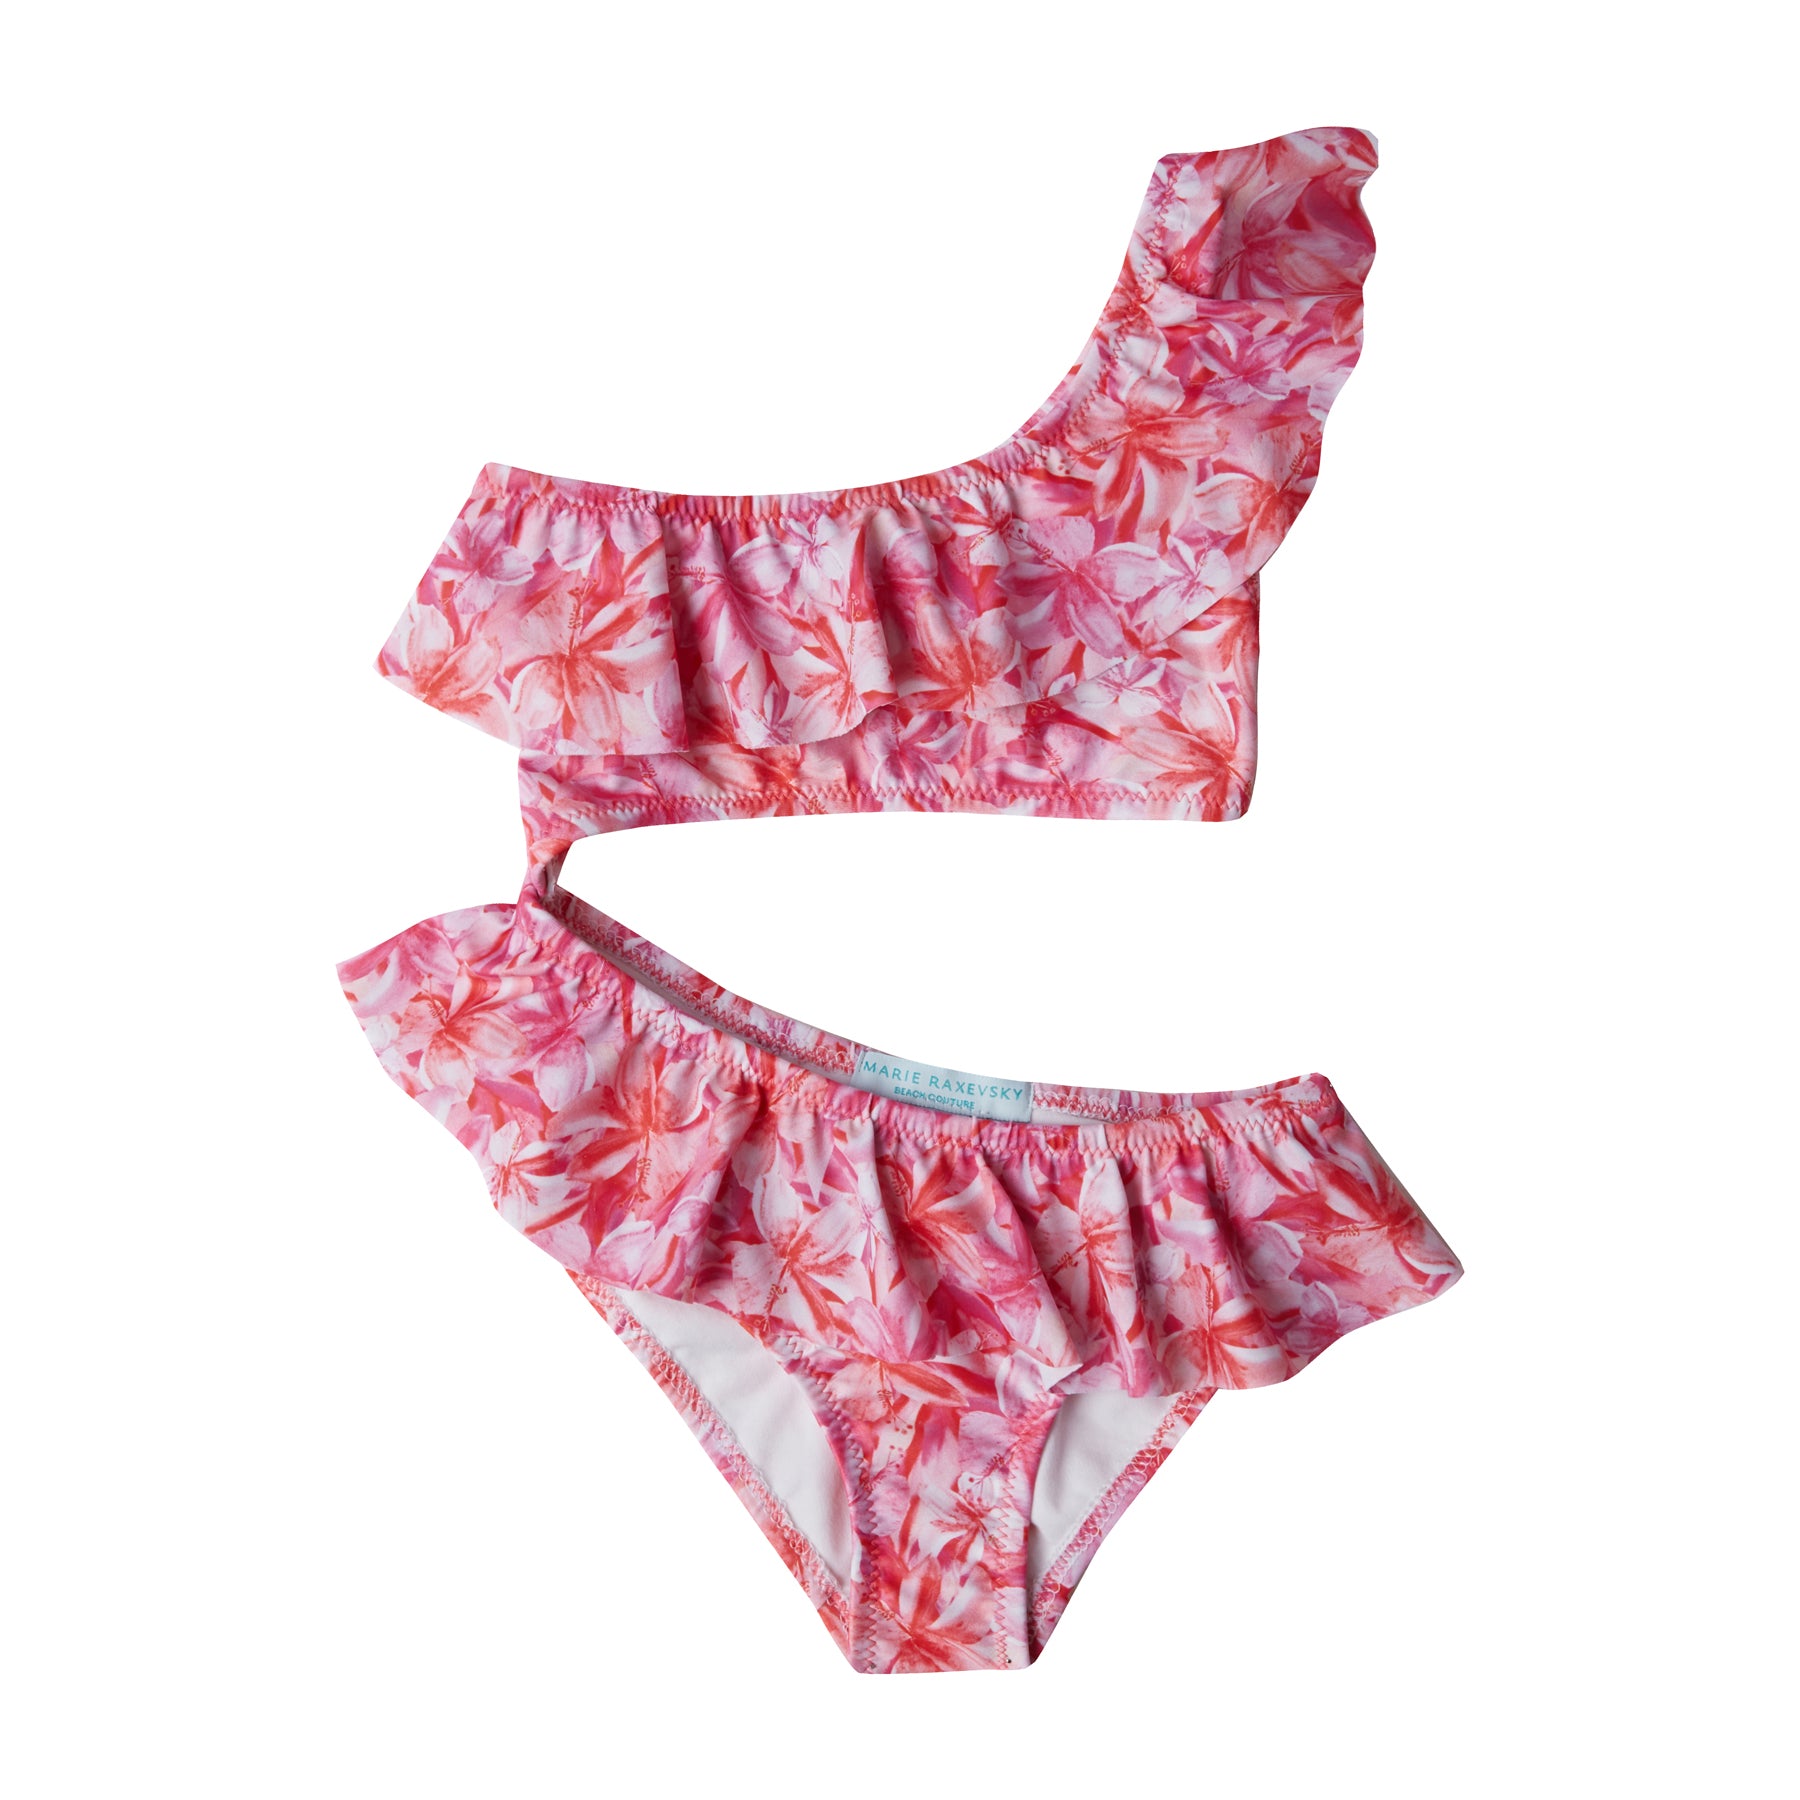 GIRL'S ONE PIECE CUT OUT HIBISCUS